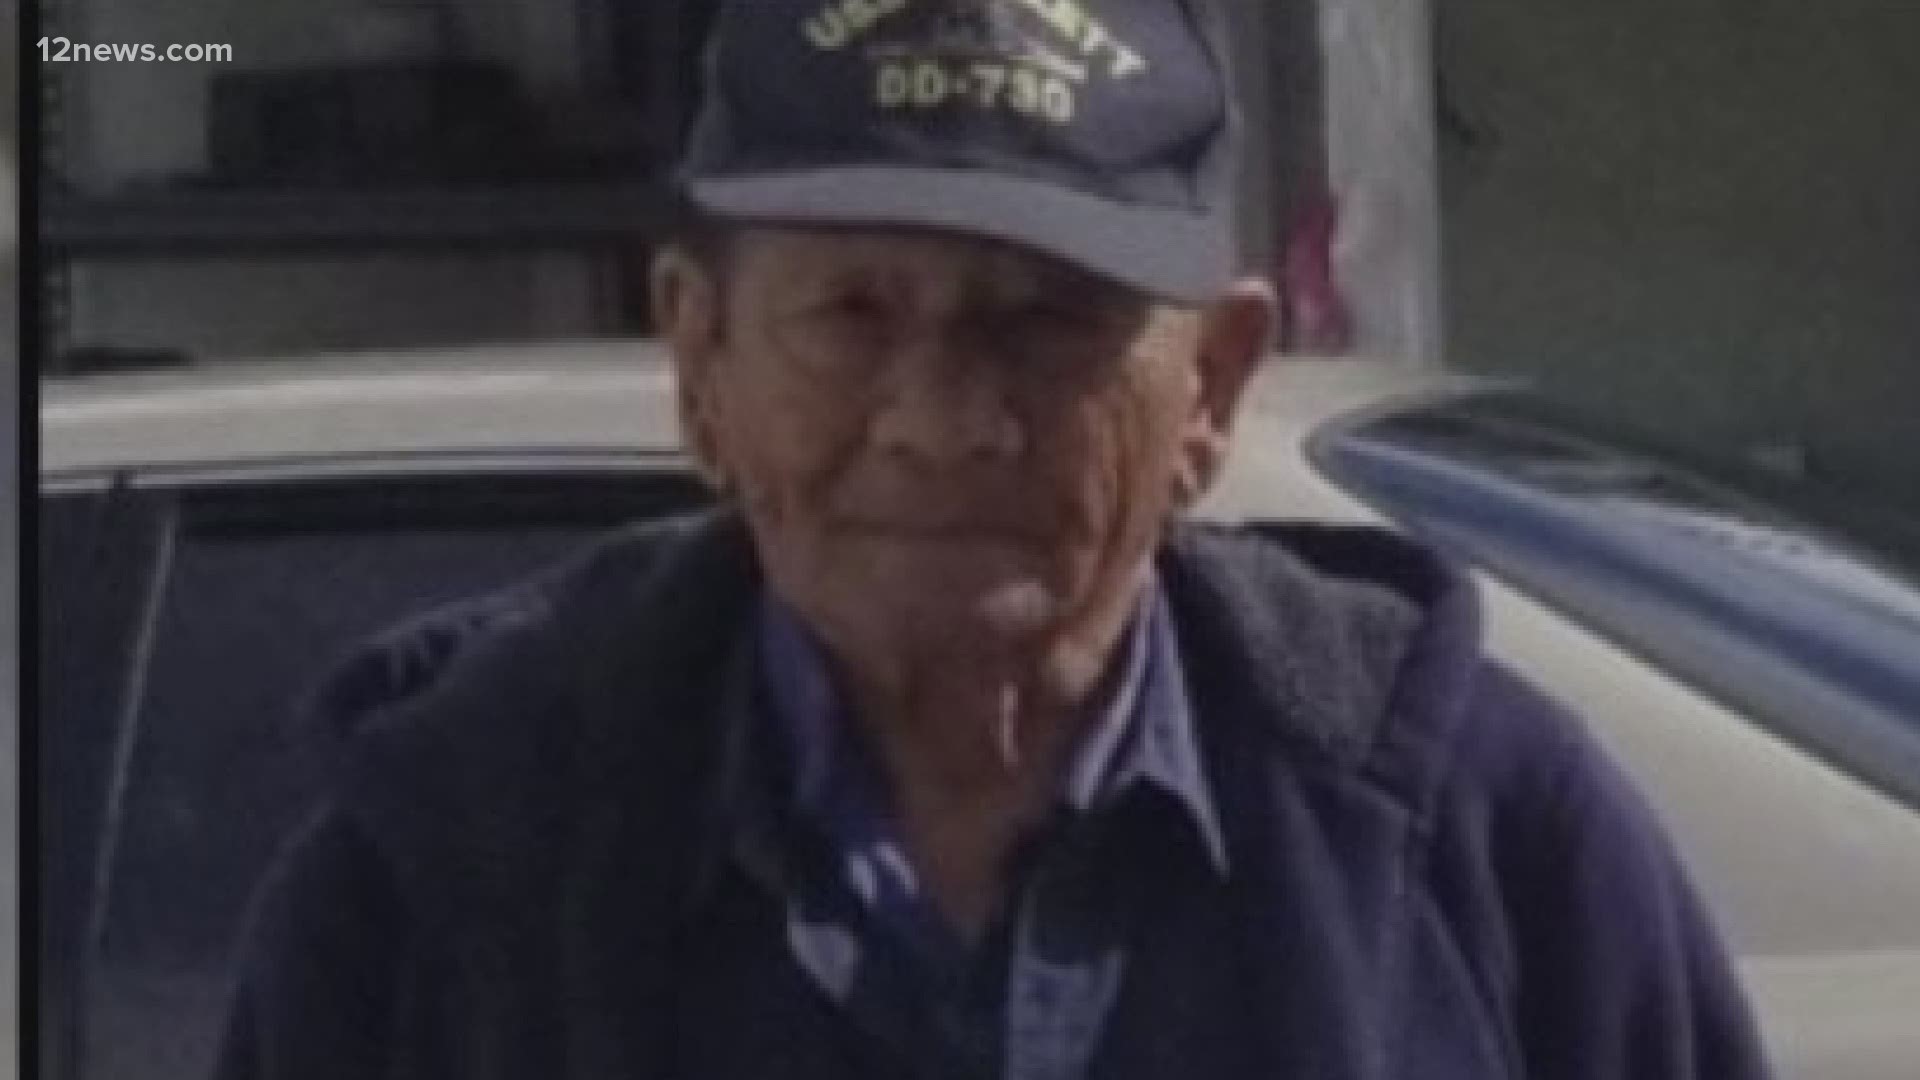 91-year-old Korean War veteran Joe Bautista passed away from COVID-19 earlier this month. His death comes as Arizona sees a down turn in COVID testing.